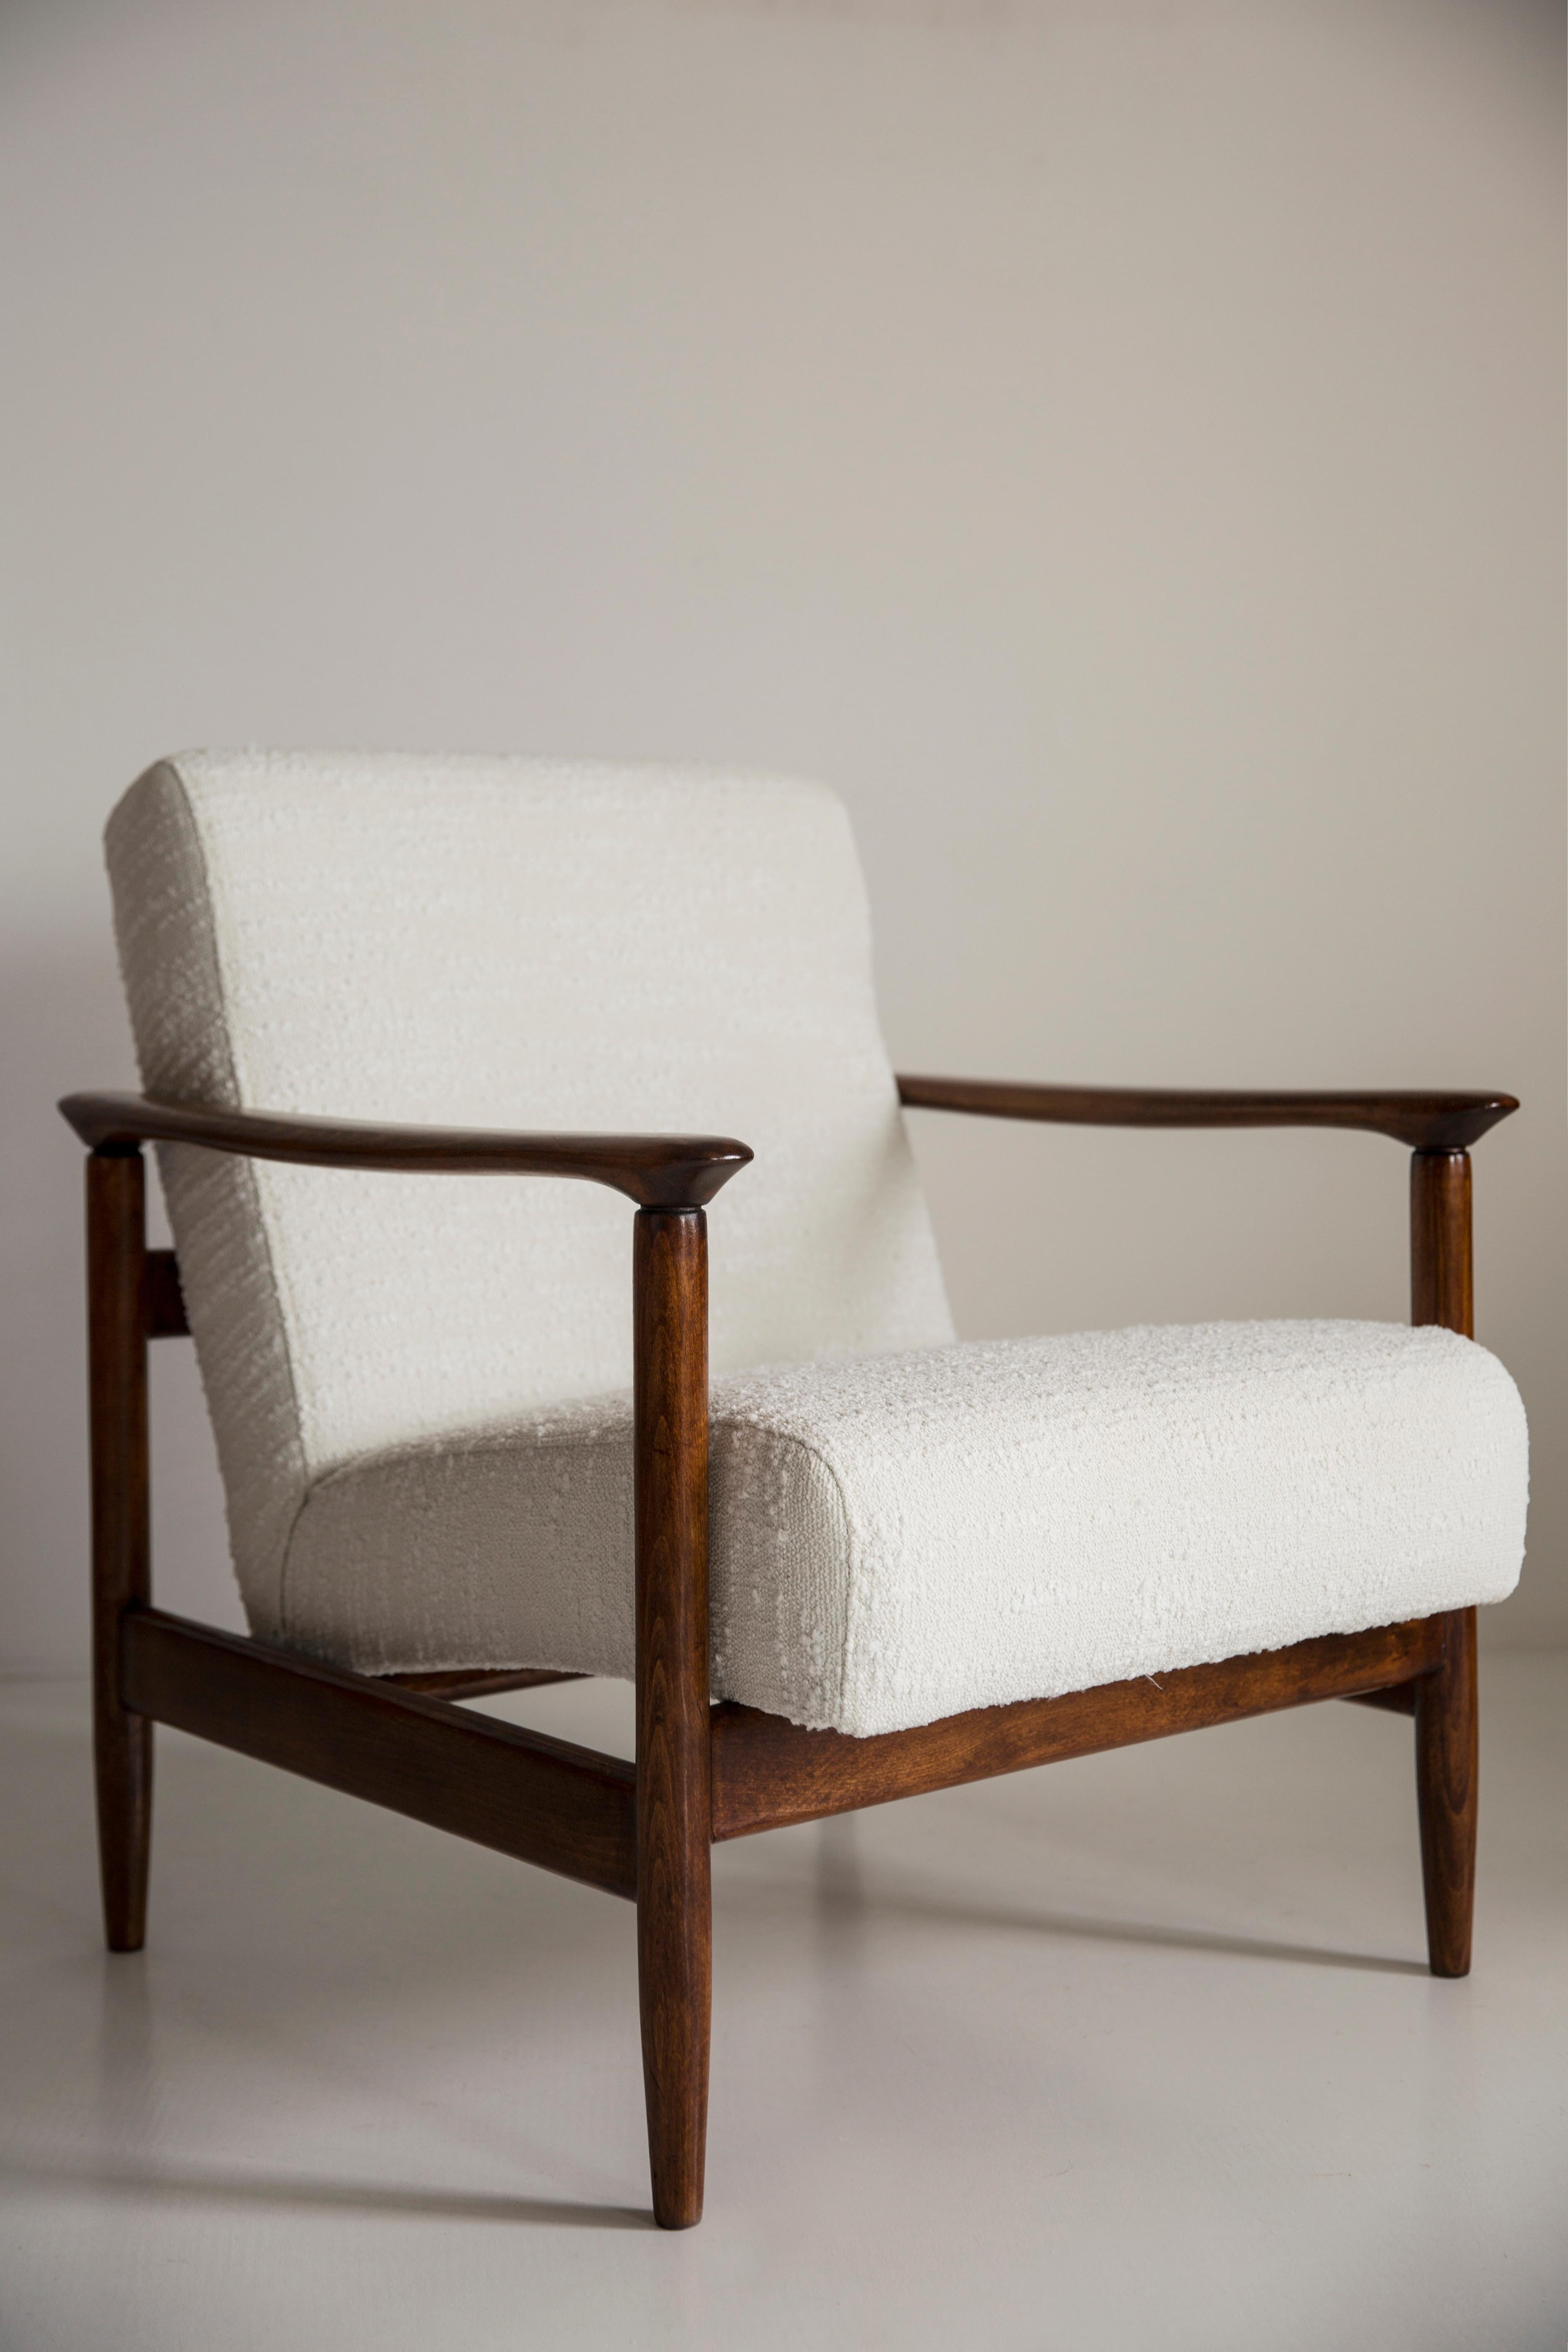 Beautiful white boucle armchair GFM-142, designed by Edmund Homa, a polish architect, designer of Industrial Design and interior architecture, professor at the Academy of Fine Arts in Gdansk. 

The armchair was made in the 1960s in the Gosciecinska